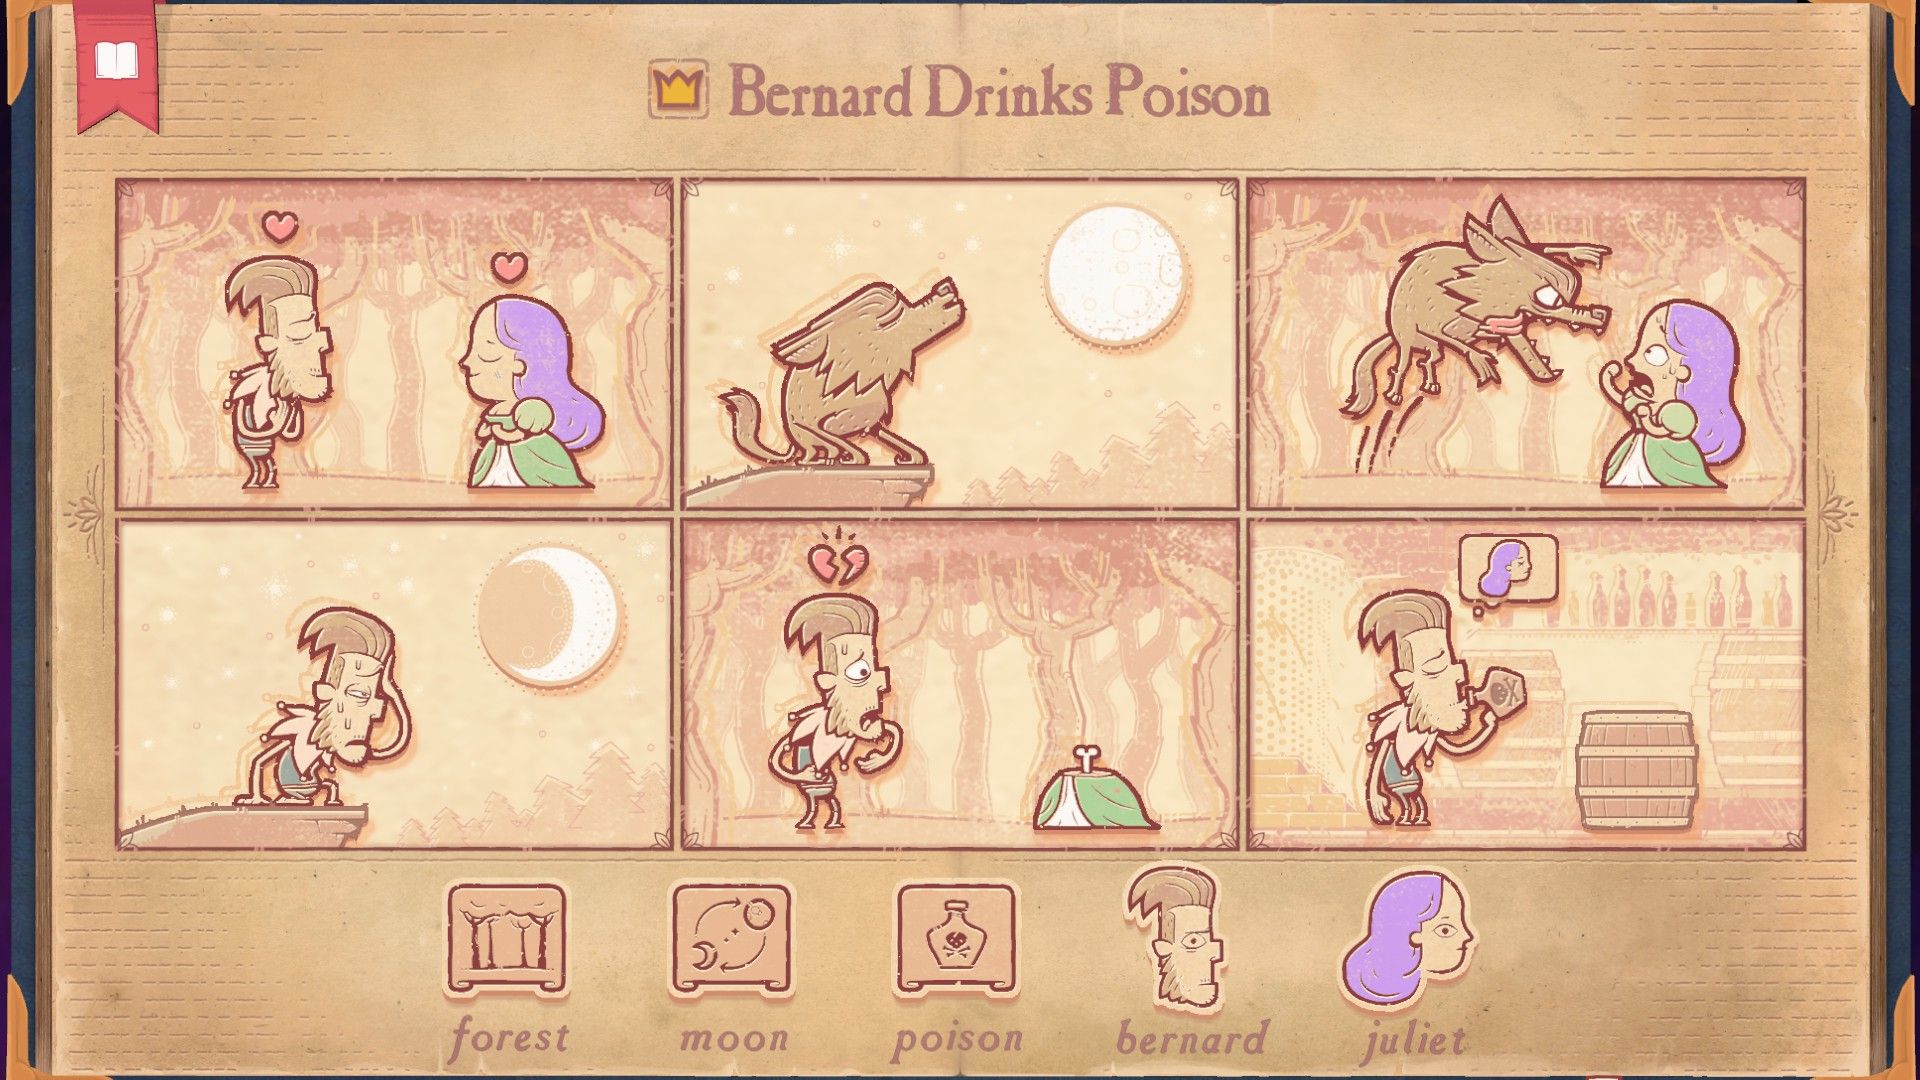 The solution for the Werewolf section of Storyteller, showing Bernard drinking poison.